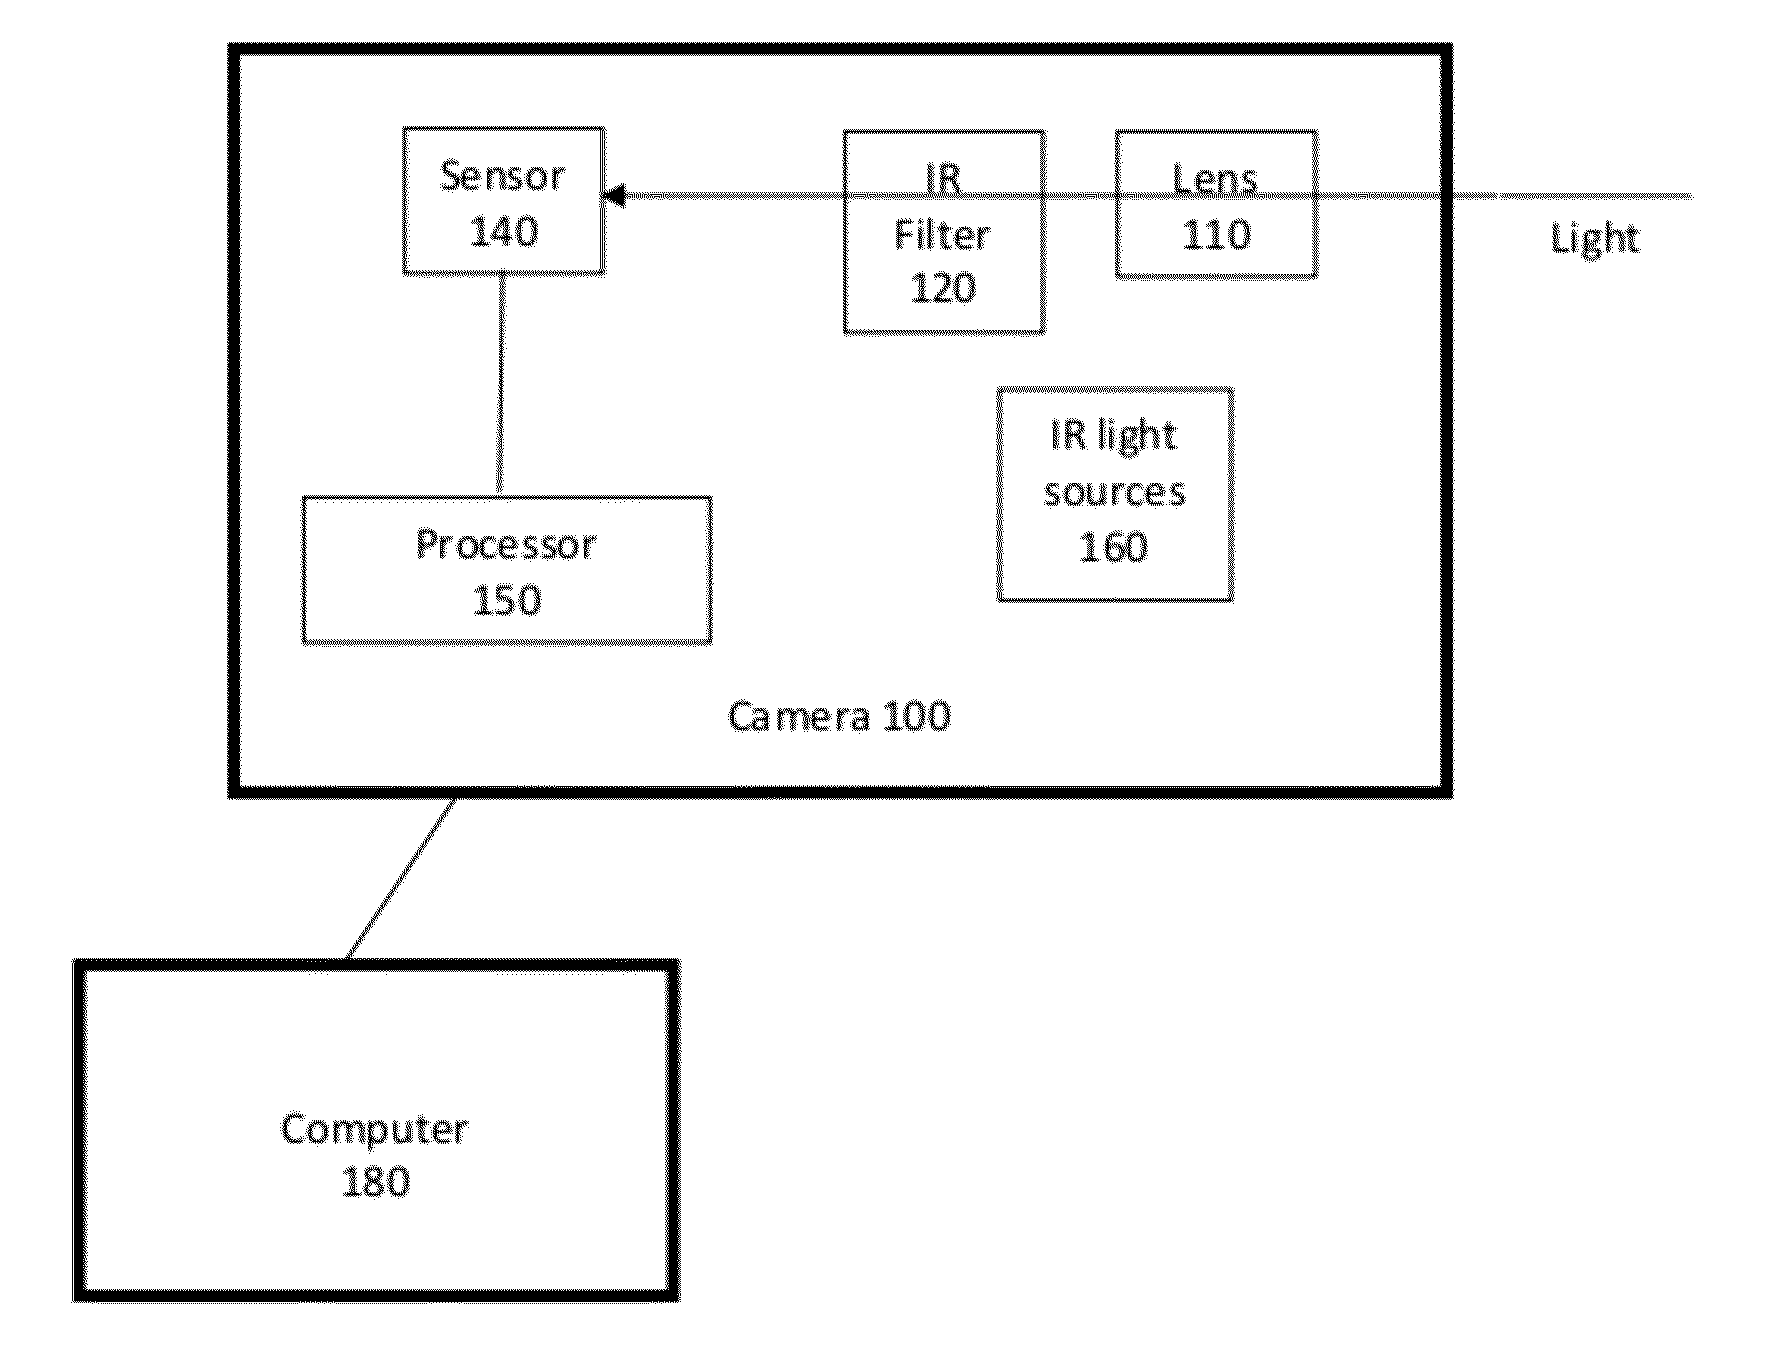 Optimized movable ir filter in cameras